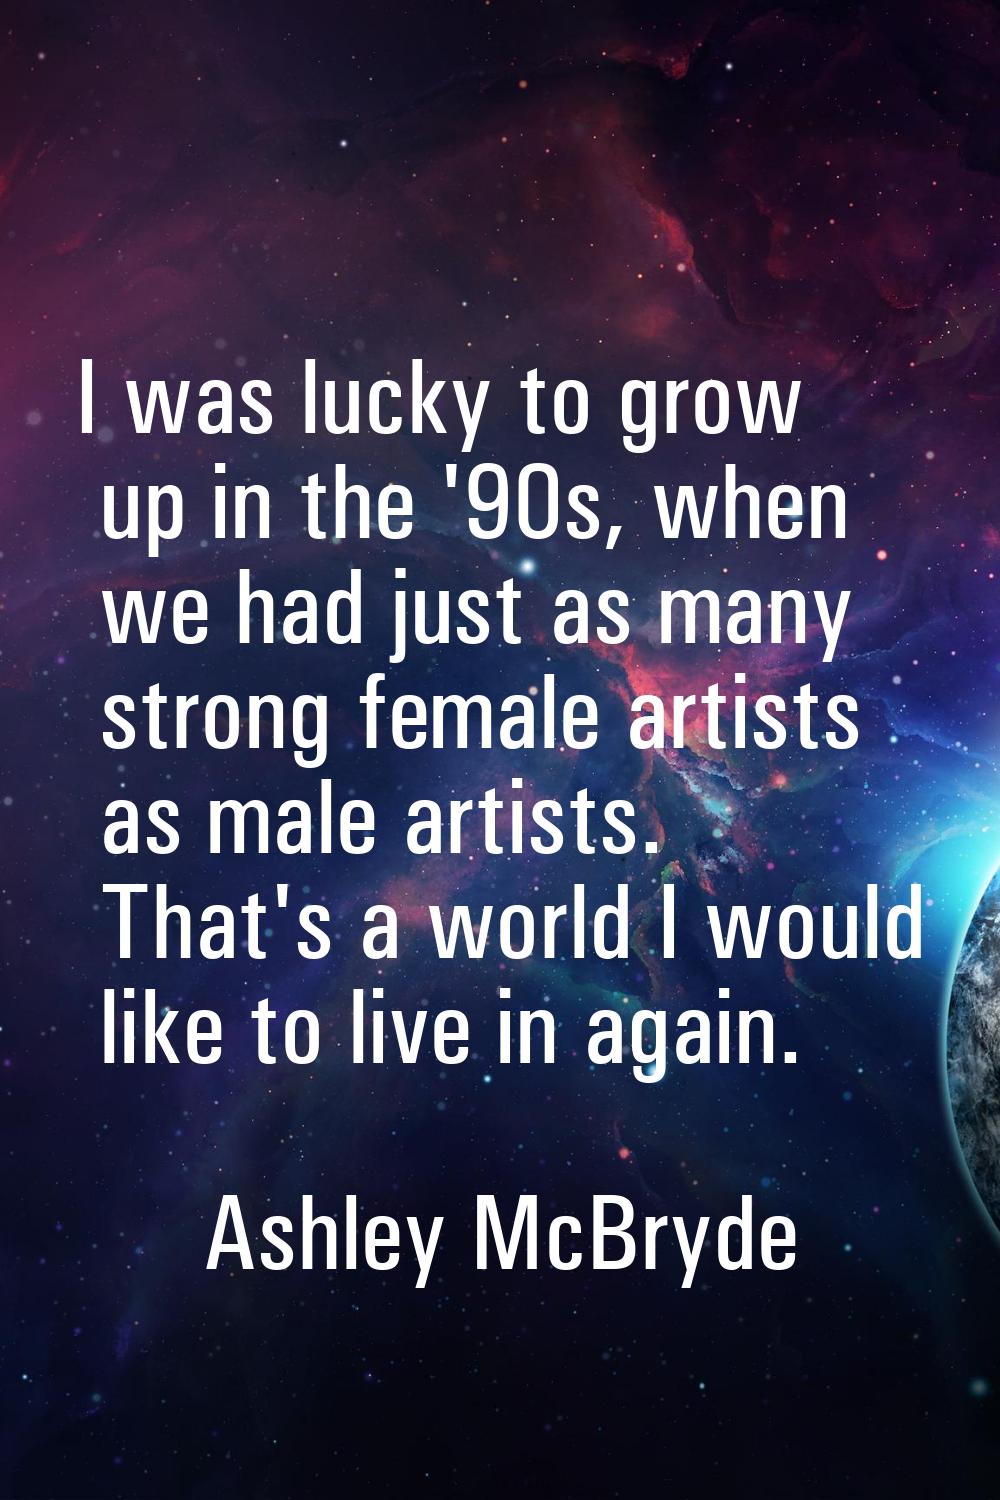 I was lucky to grow up in the '90s, when we had just as many strong female artists as male artists.